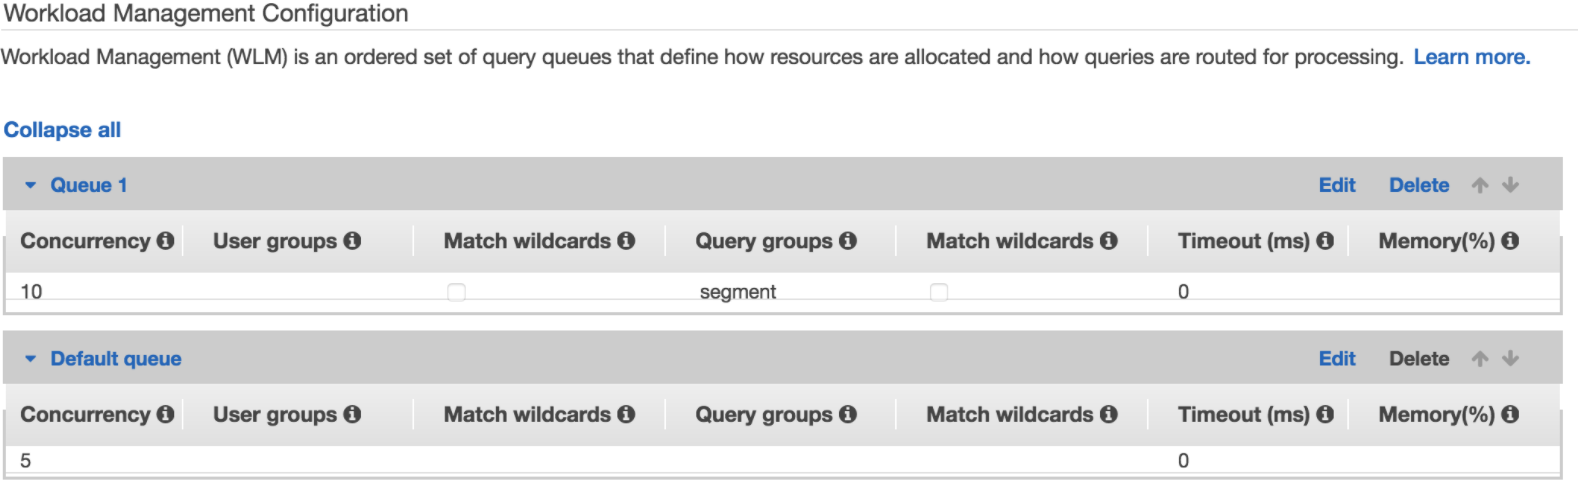 Screenshot of the Workload Management Configuration settings page in AWS with a named queue, Queue 1, and the default queue present.